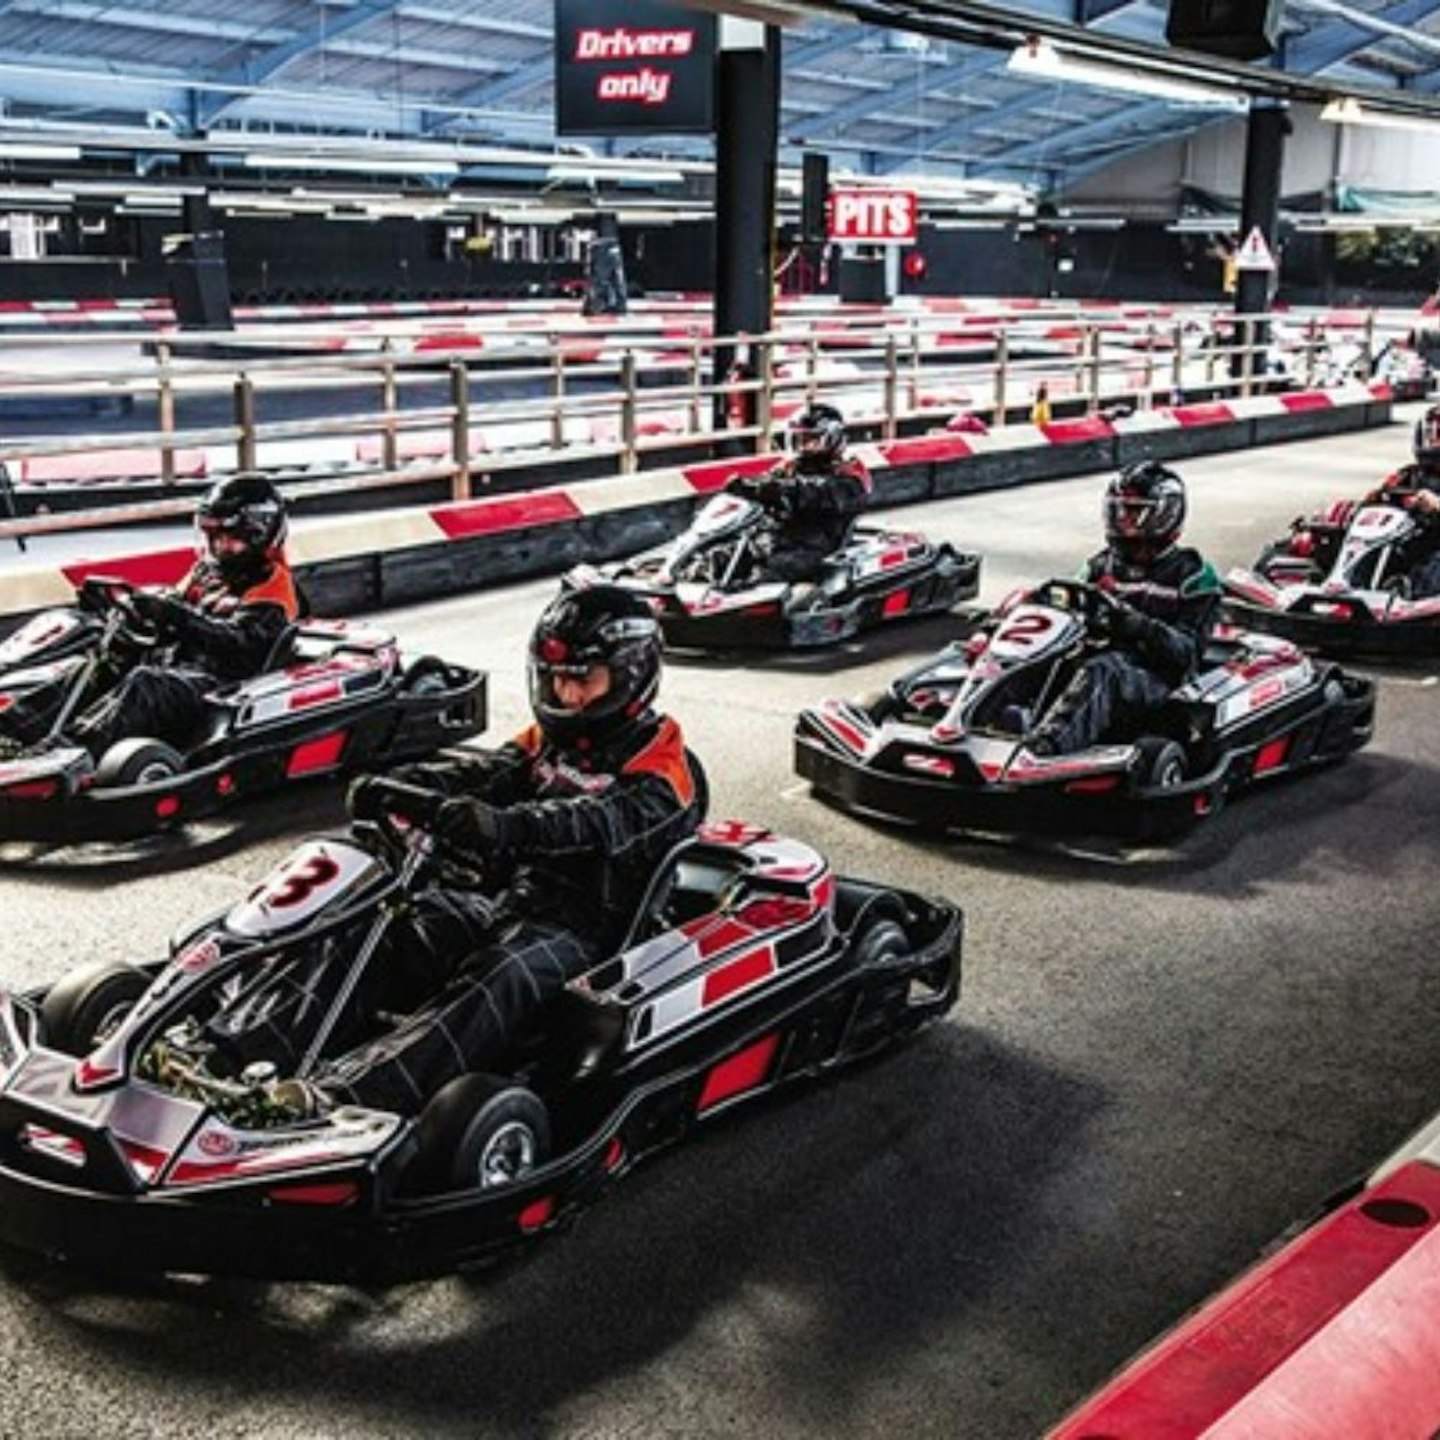 Indoor Go Karting for Two with TeamSport